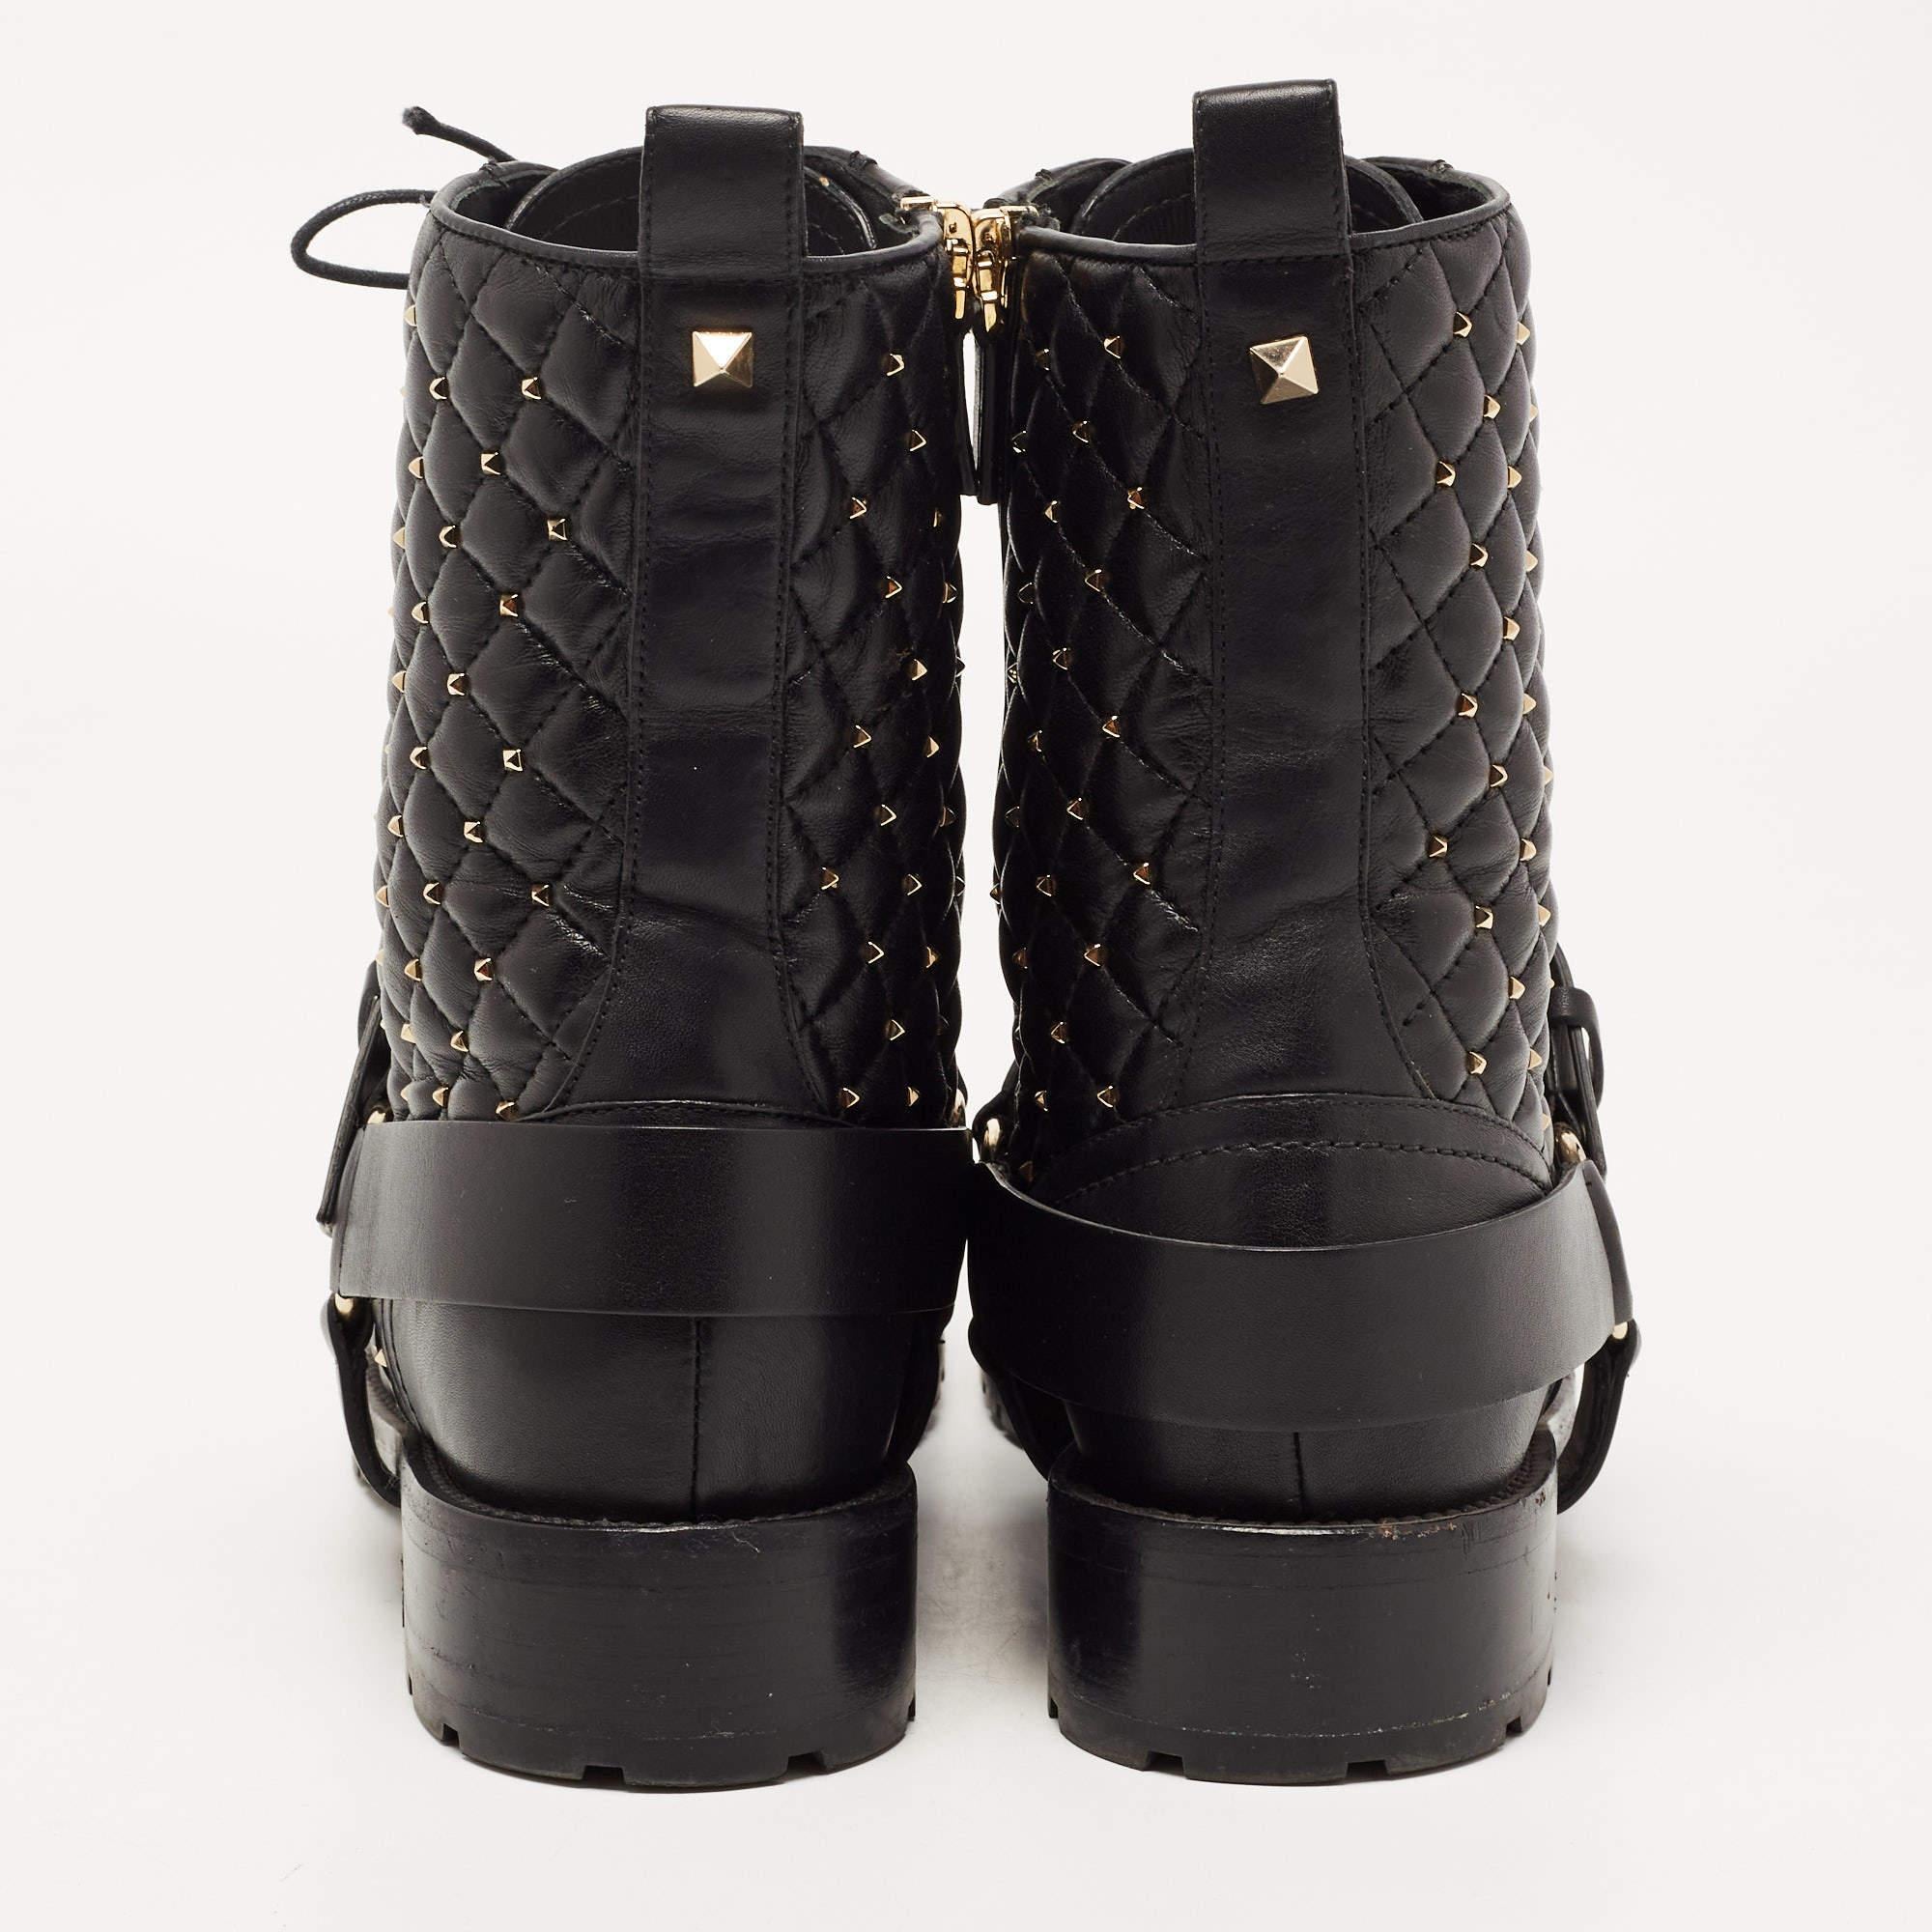 Valentino Black Quilted Leather Rockstud Buckle Details Ankle Boots Size 39 1